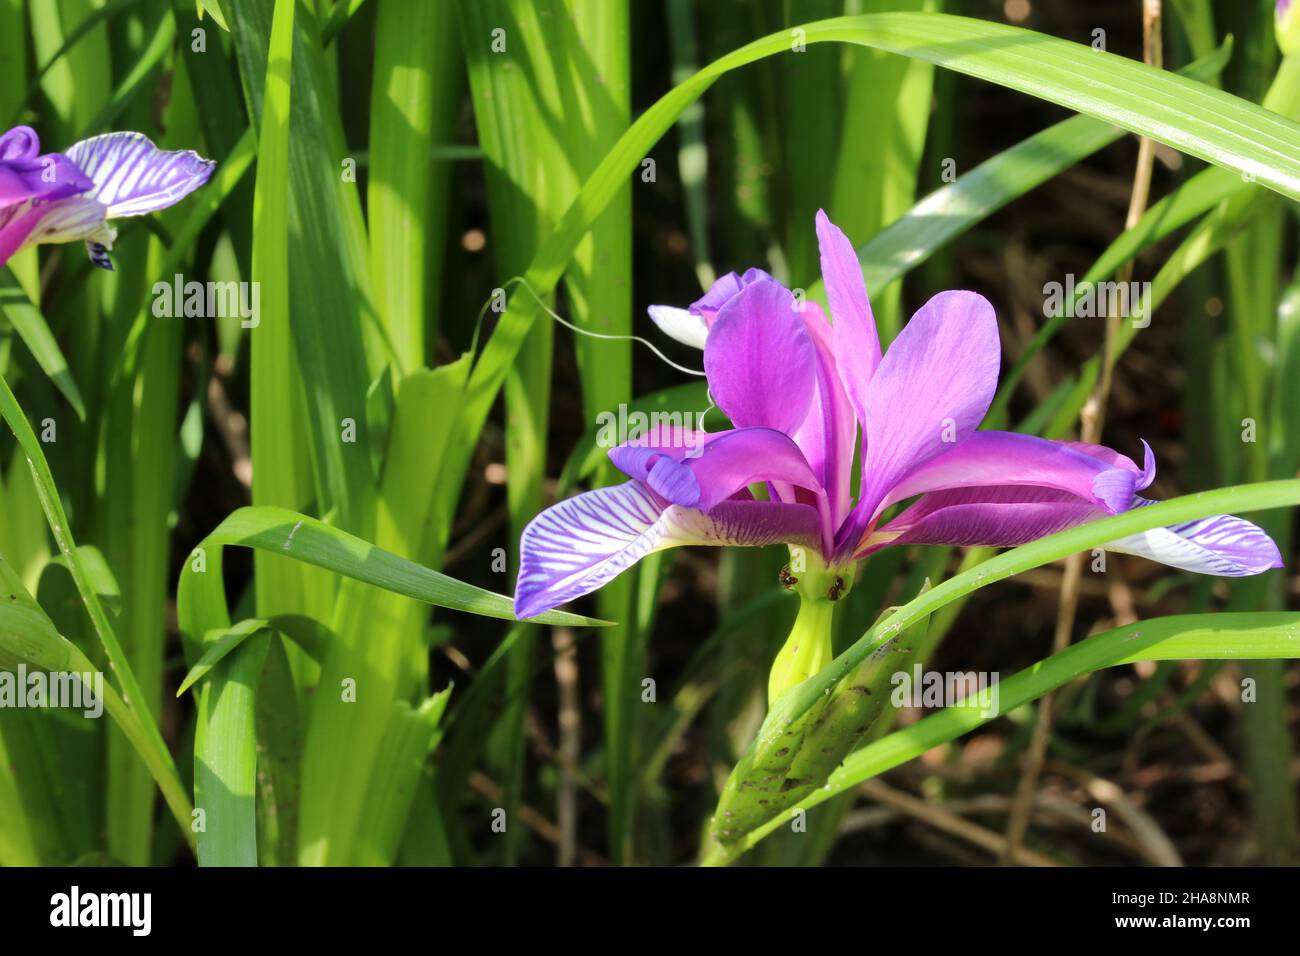 Iris graminea on blurred background.  Blue and violet flowers, almost hidden by narrow, grassy leaves, and a plum scented fragrance. Stock Photo